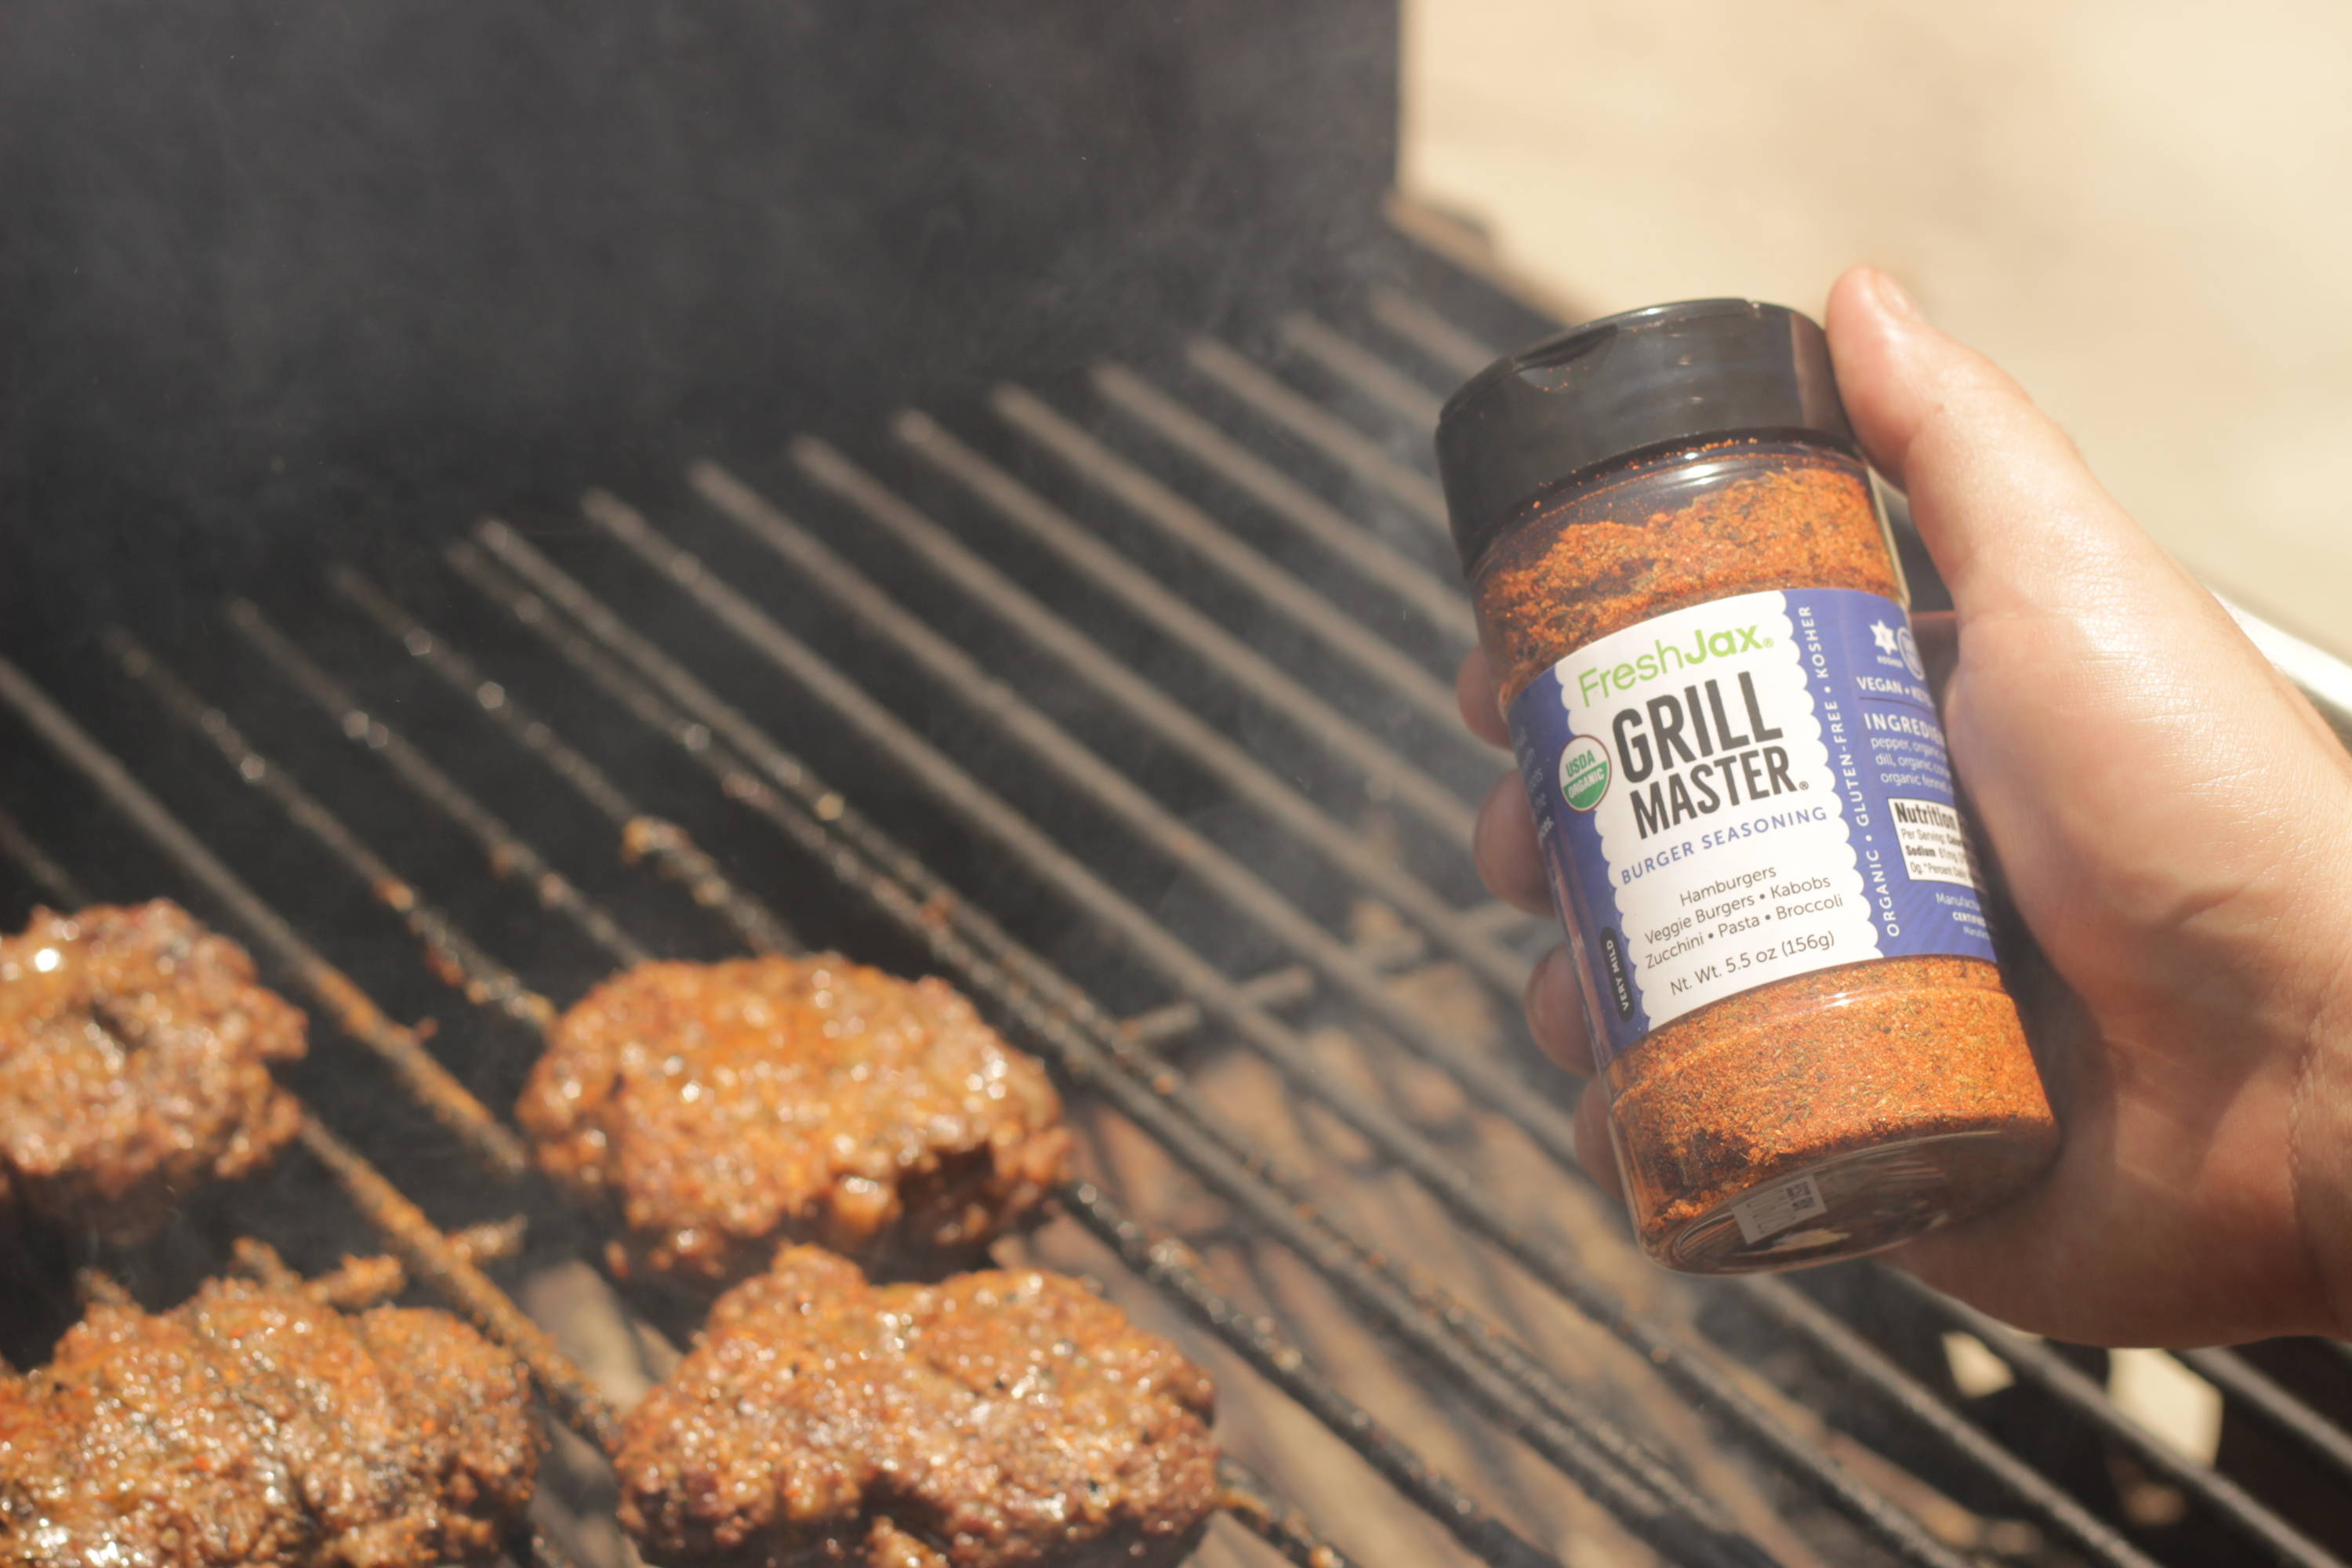 Grill Master Organic Burger Seasoning for grilling meats